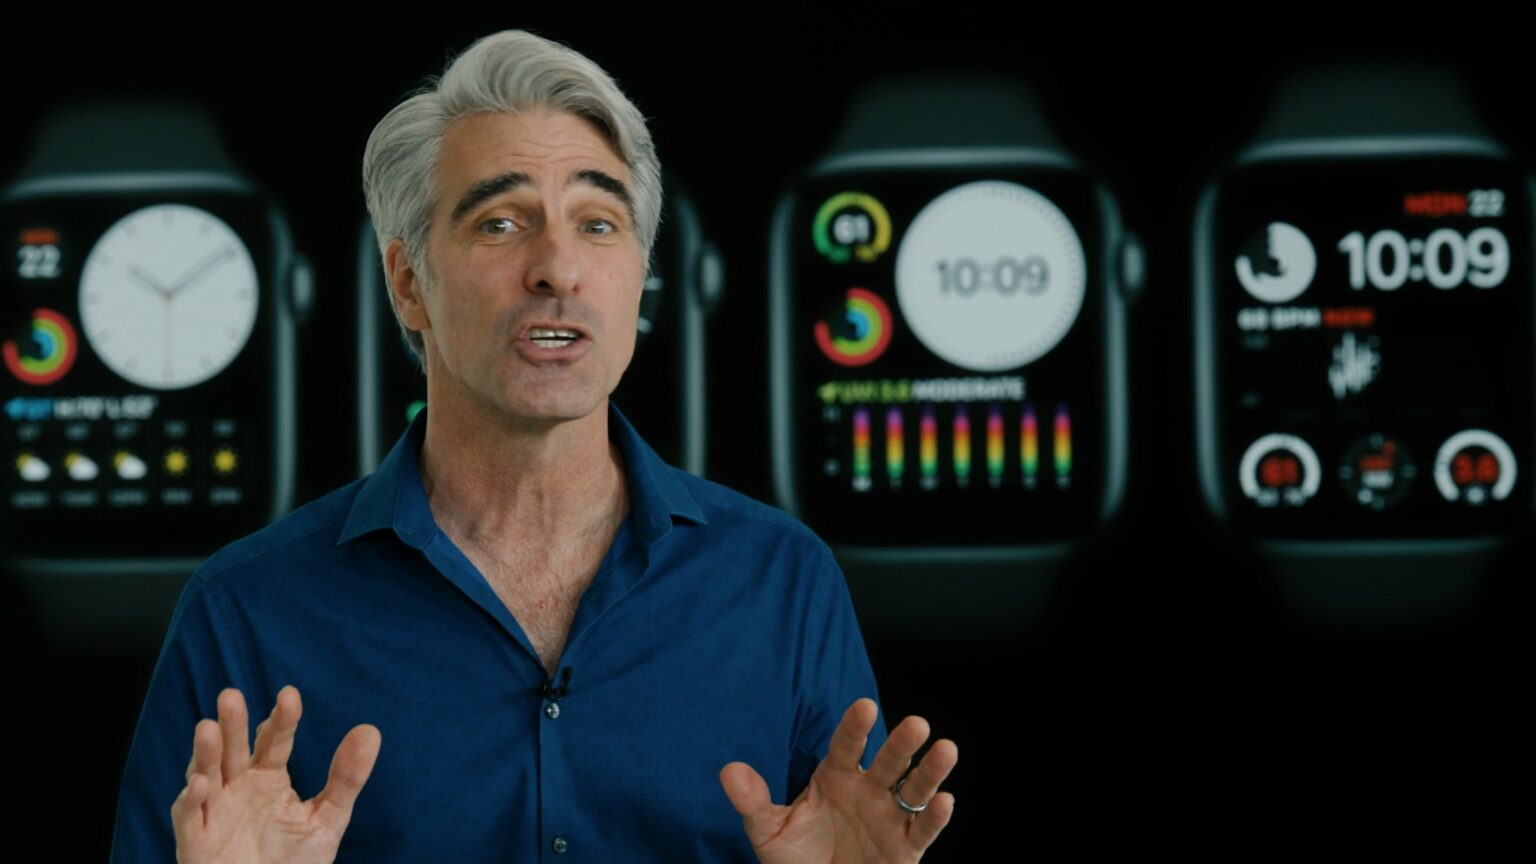 Craig Federighi talks about WWDC 2020, the first virtual Worldwide Developers Conference.